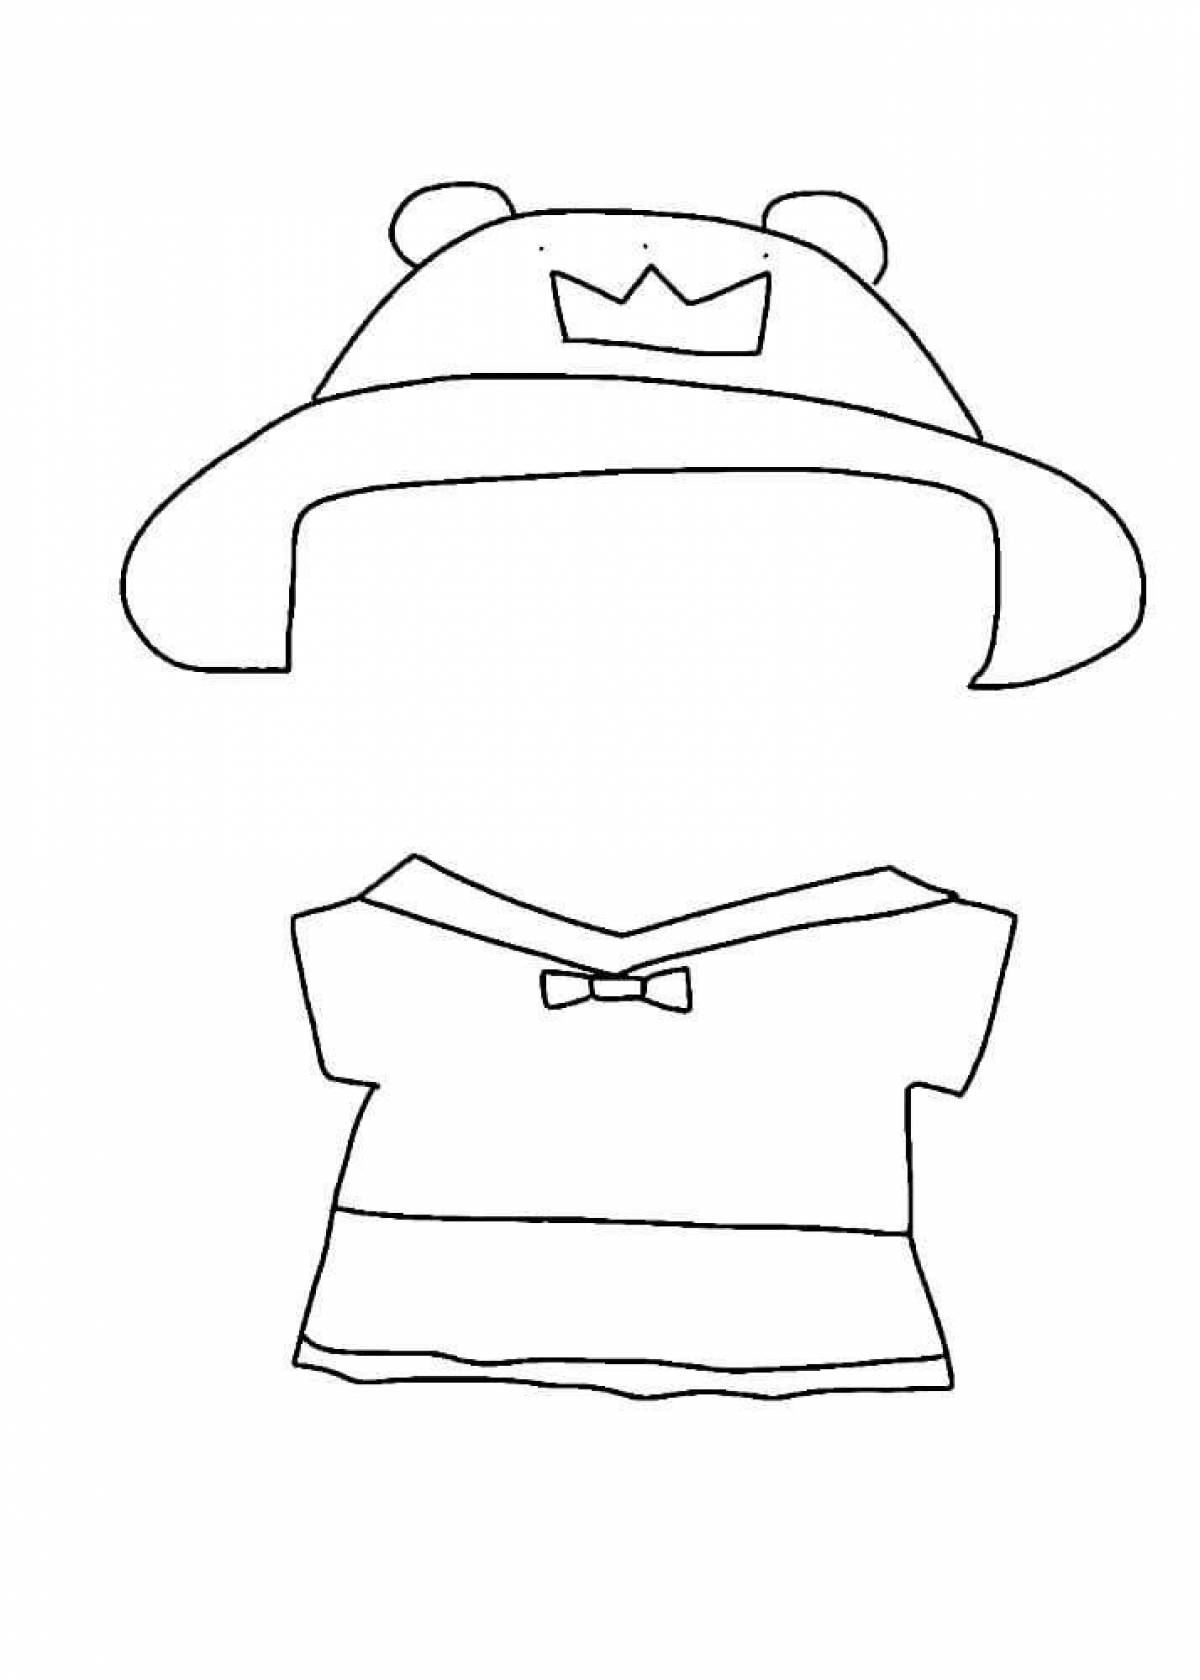 Coloring page elegant dressed duck